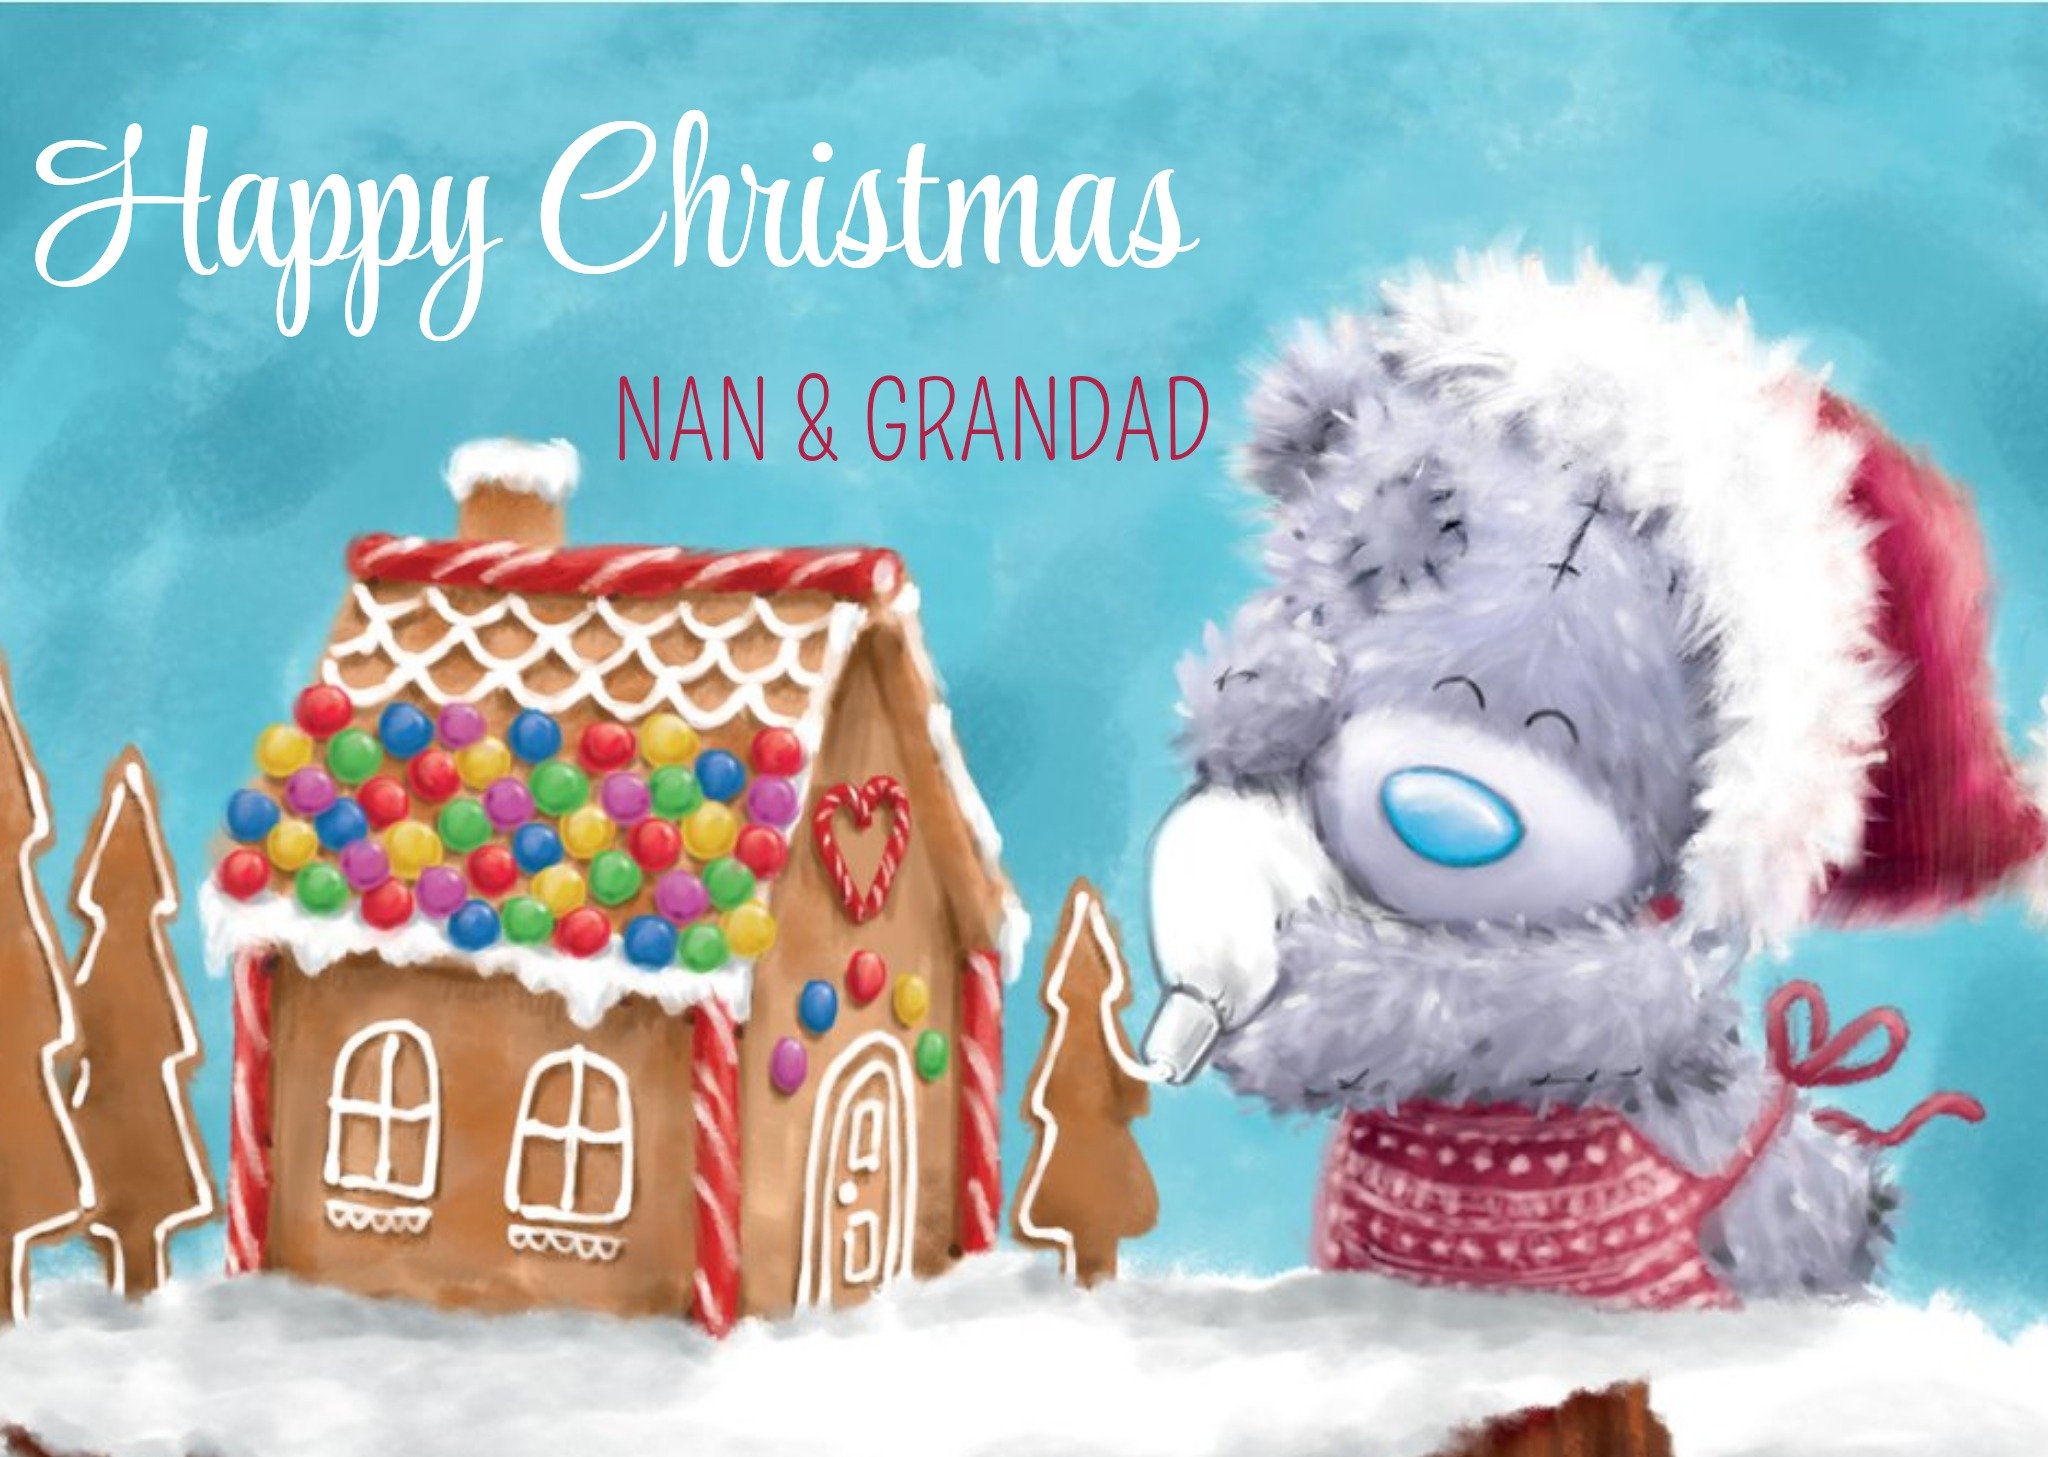 Me To You Tatty Teddy Gingerbread House Christmas Card For Nan And Grandad, Large